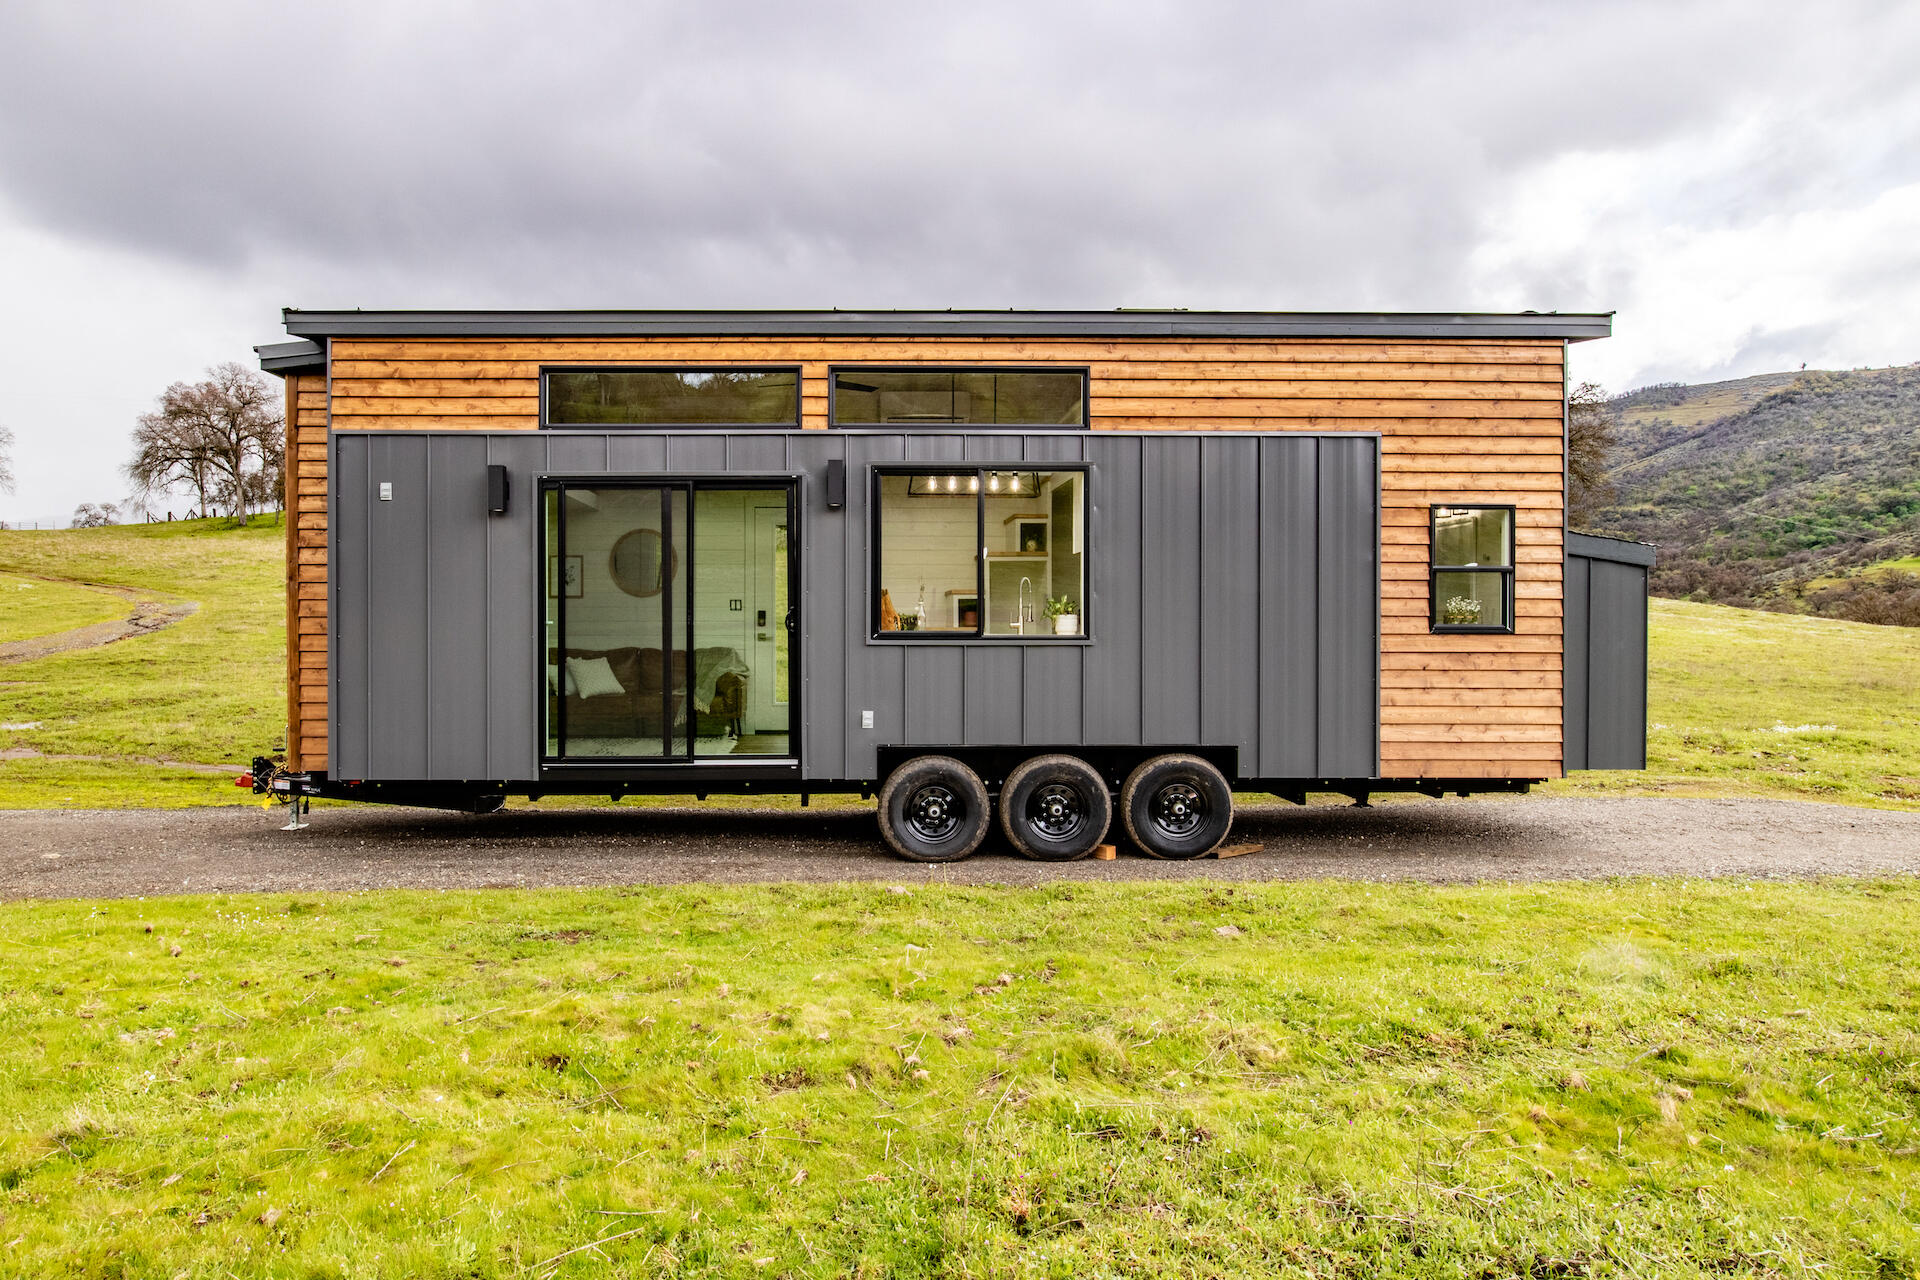 https://s1.cdn.autoevolution.com/images/news/jt-collective-s-first-tiny-house-design-lets-you-simplify-your-life-yet-live-comfortably-216125_1.jpg